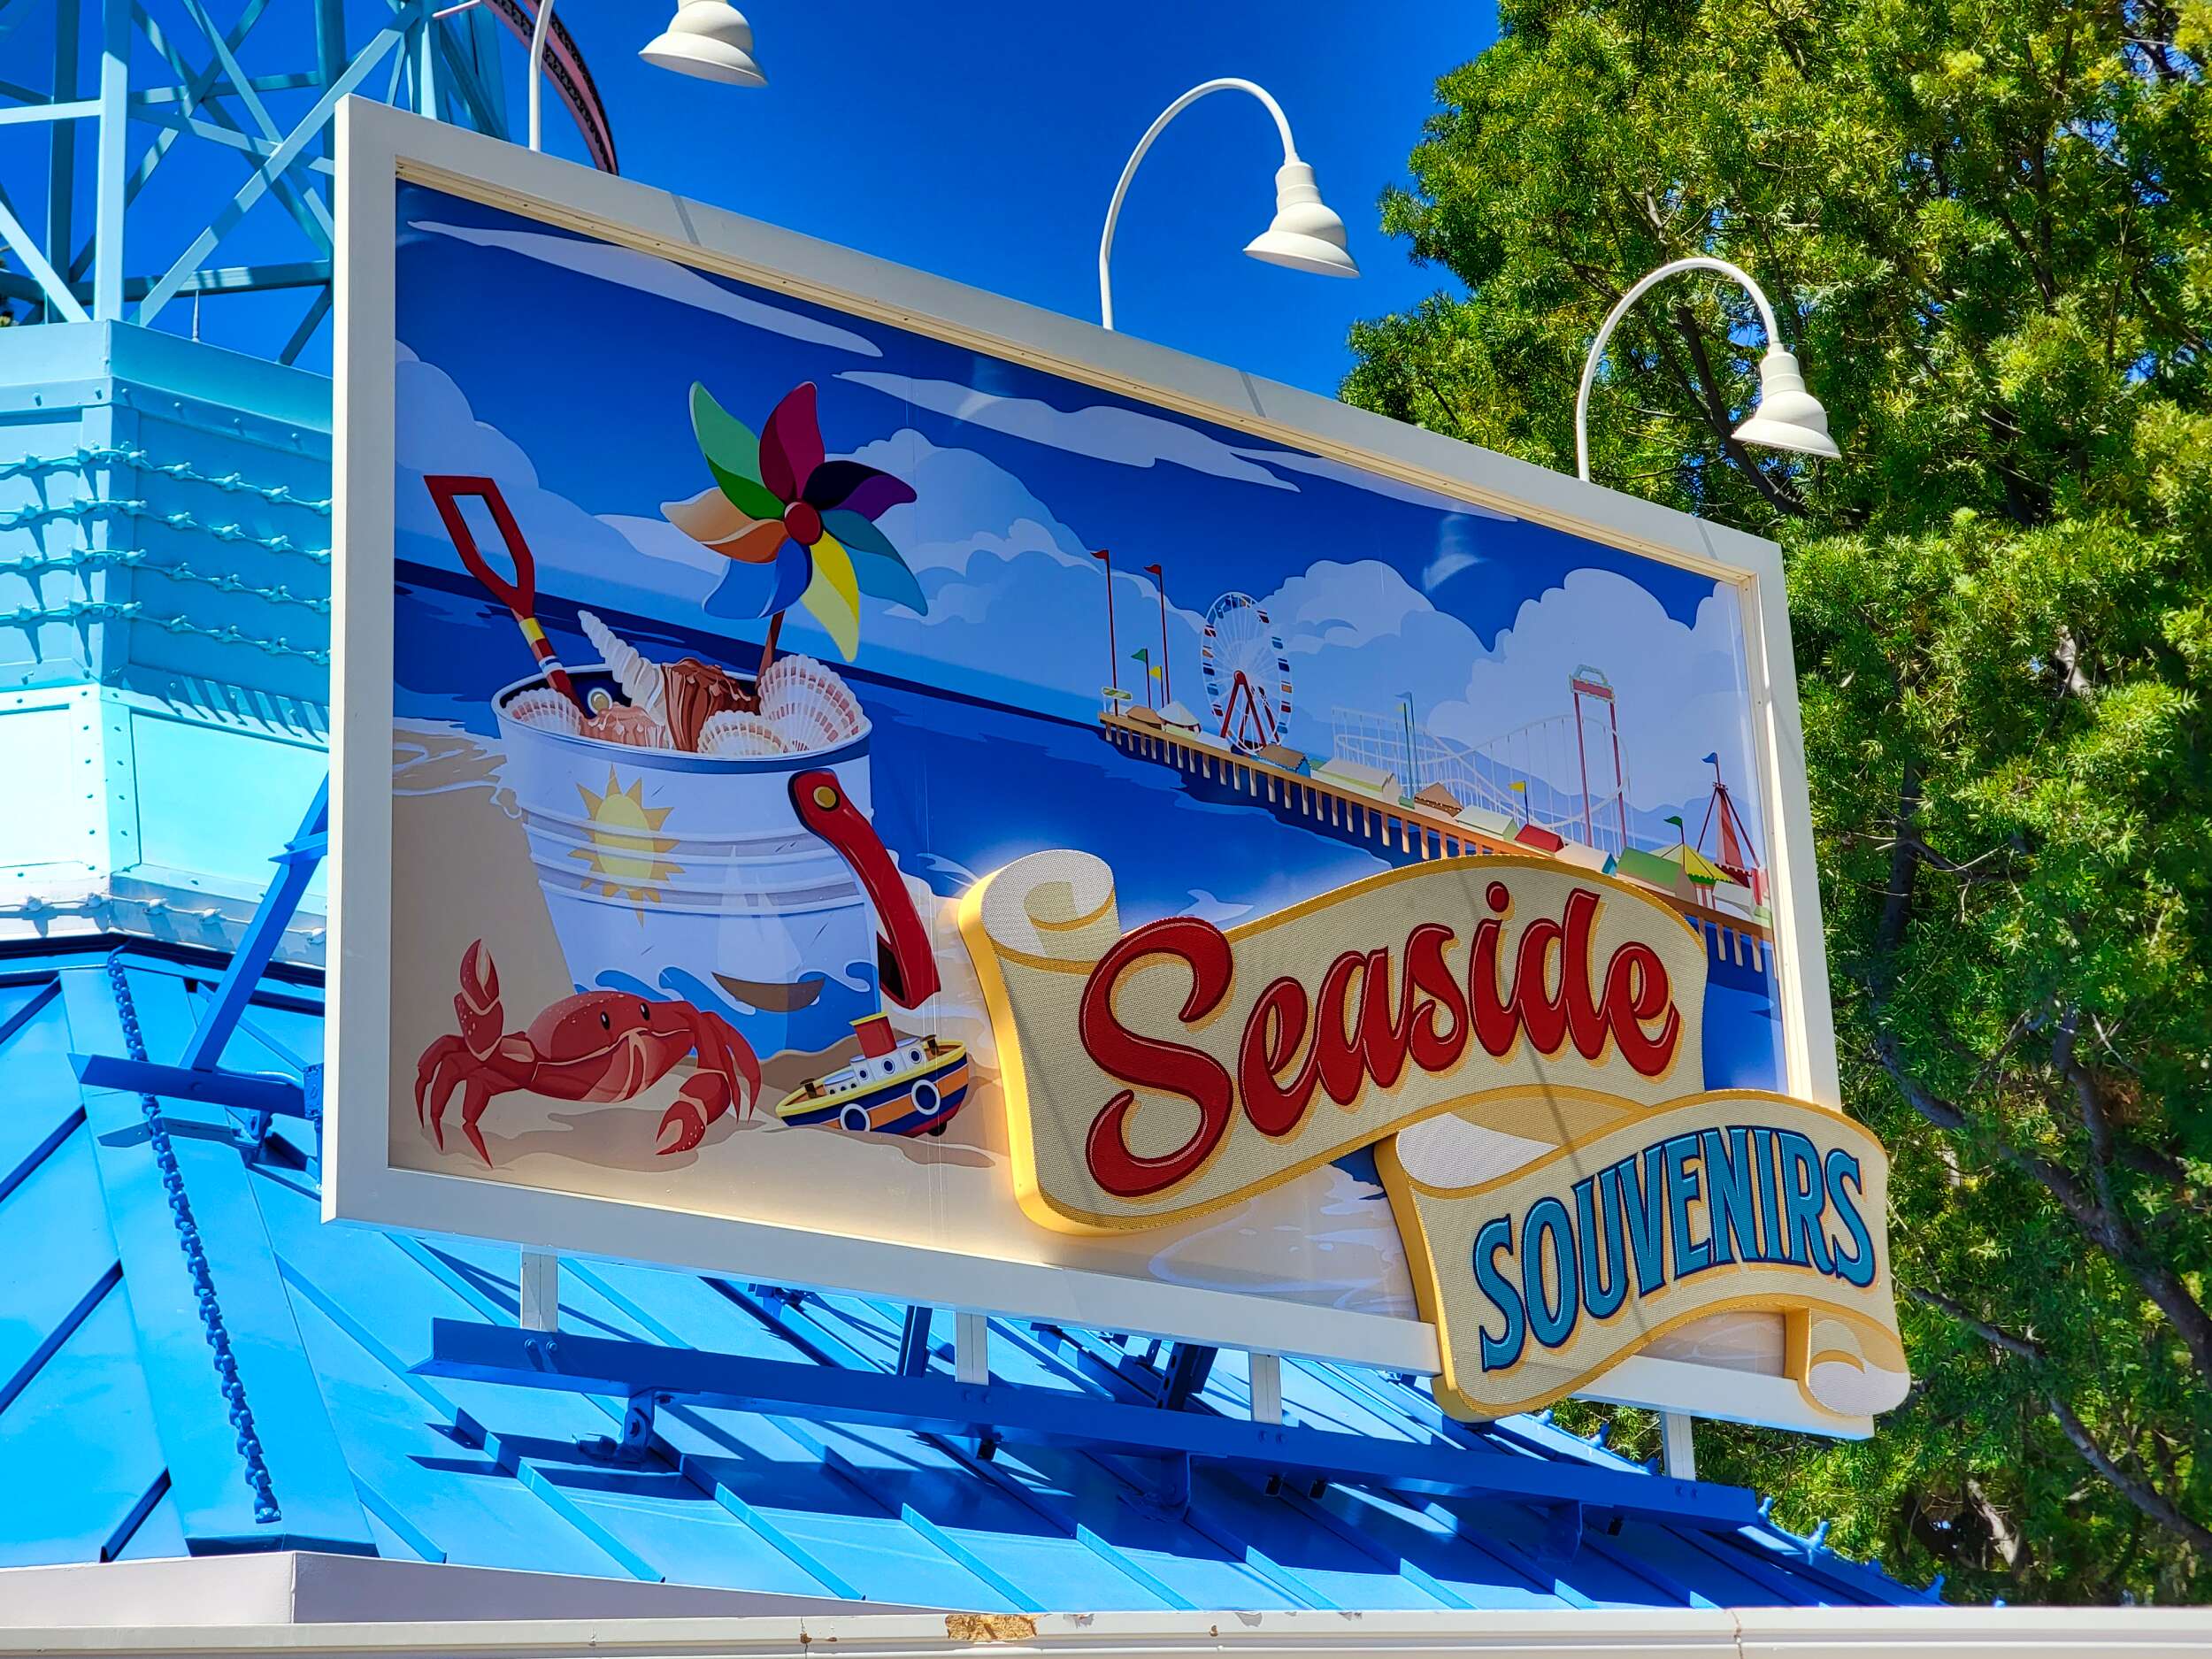 Seaside Souvenirs new sign